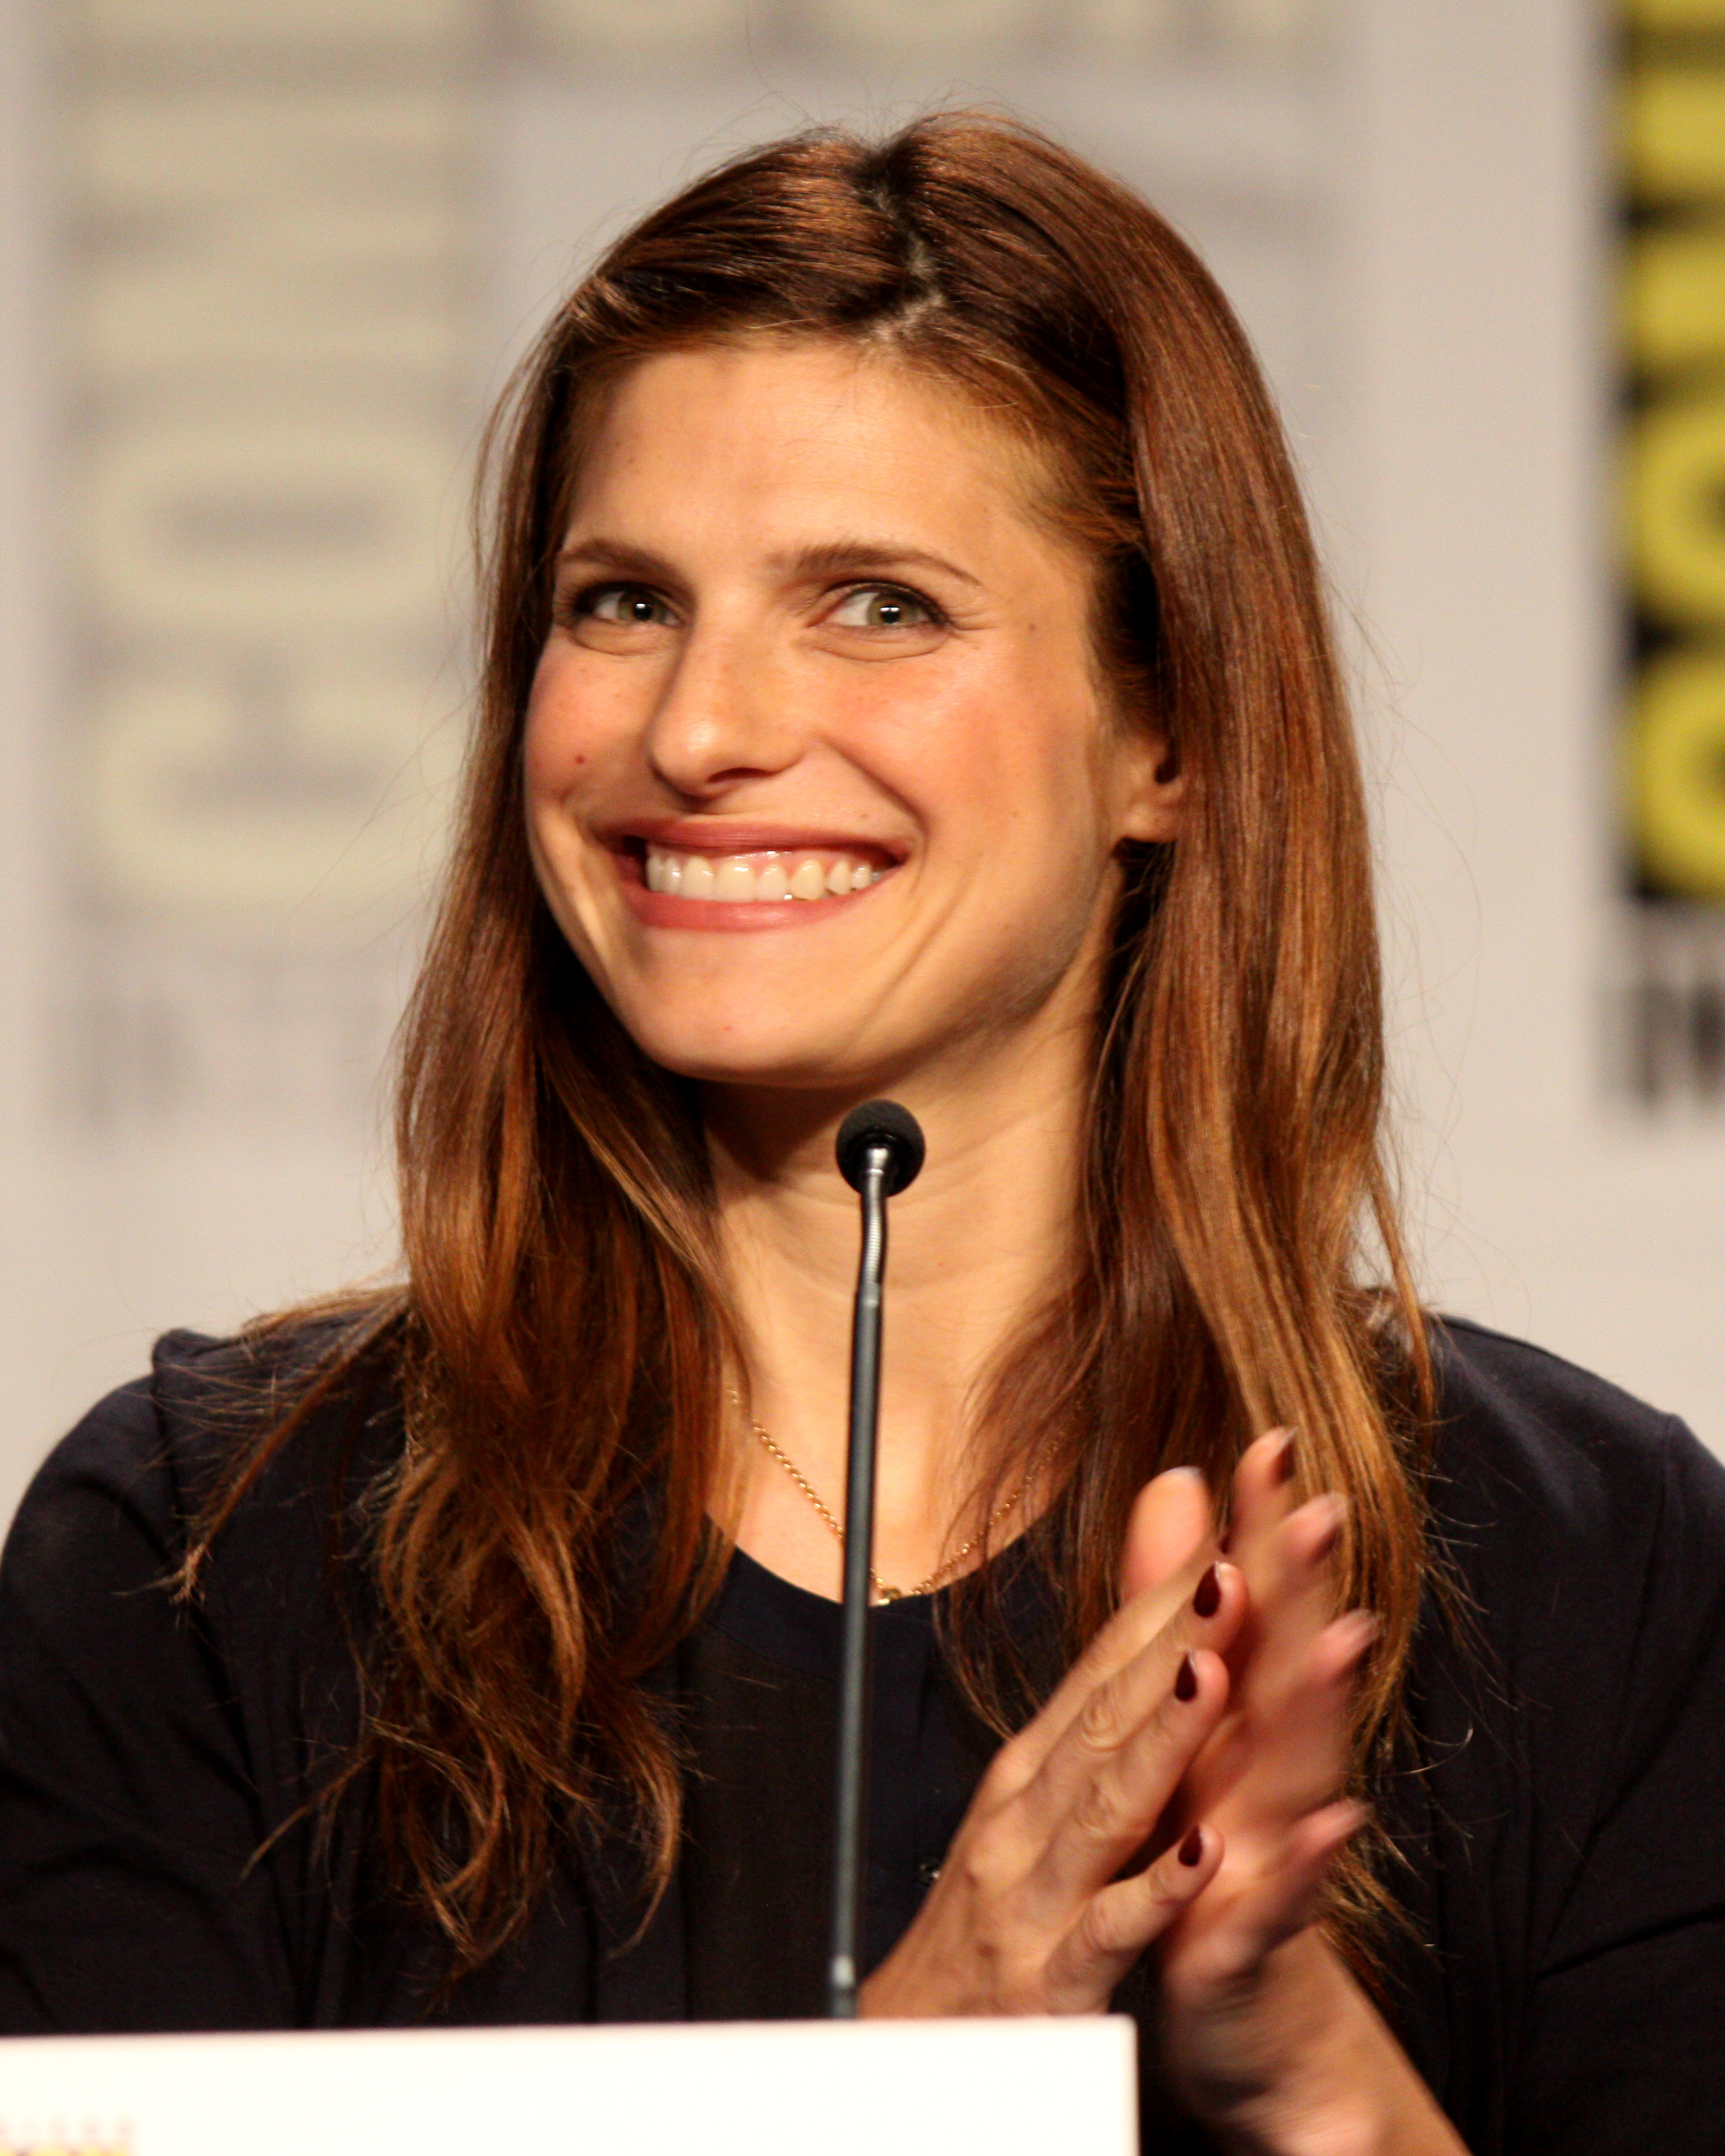 Lake Bell Wearing A Black Blouse With A Wireless Mic In Front